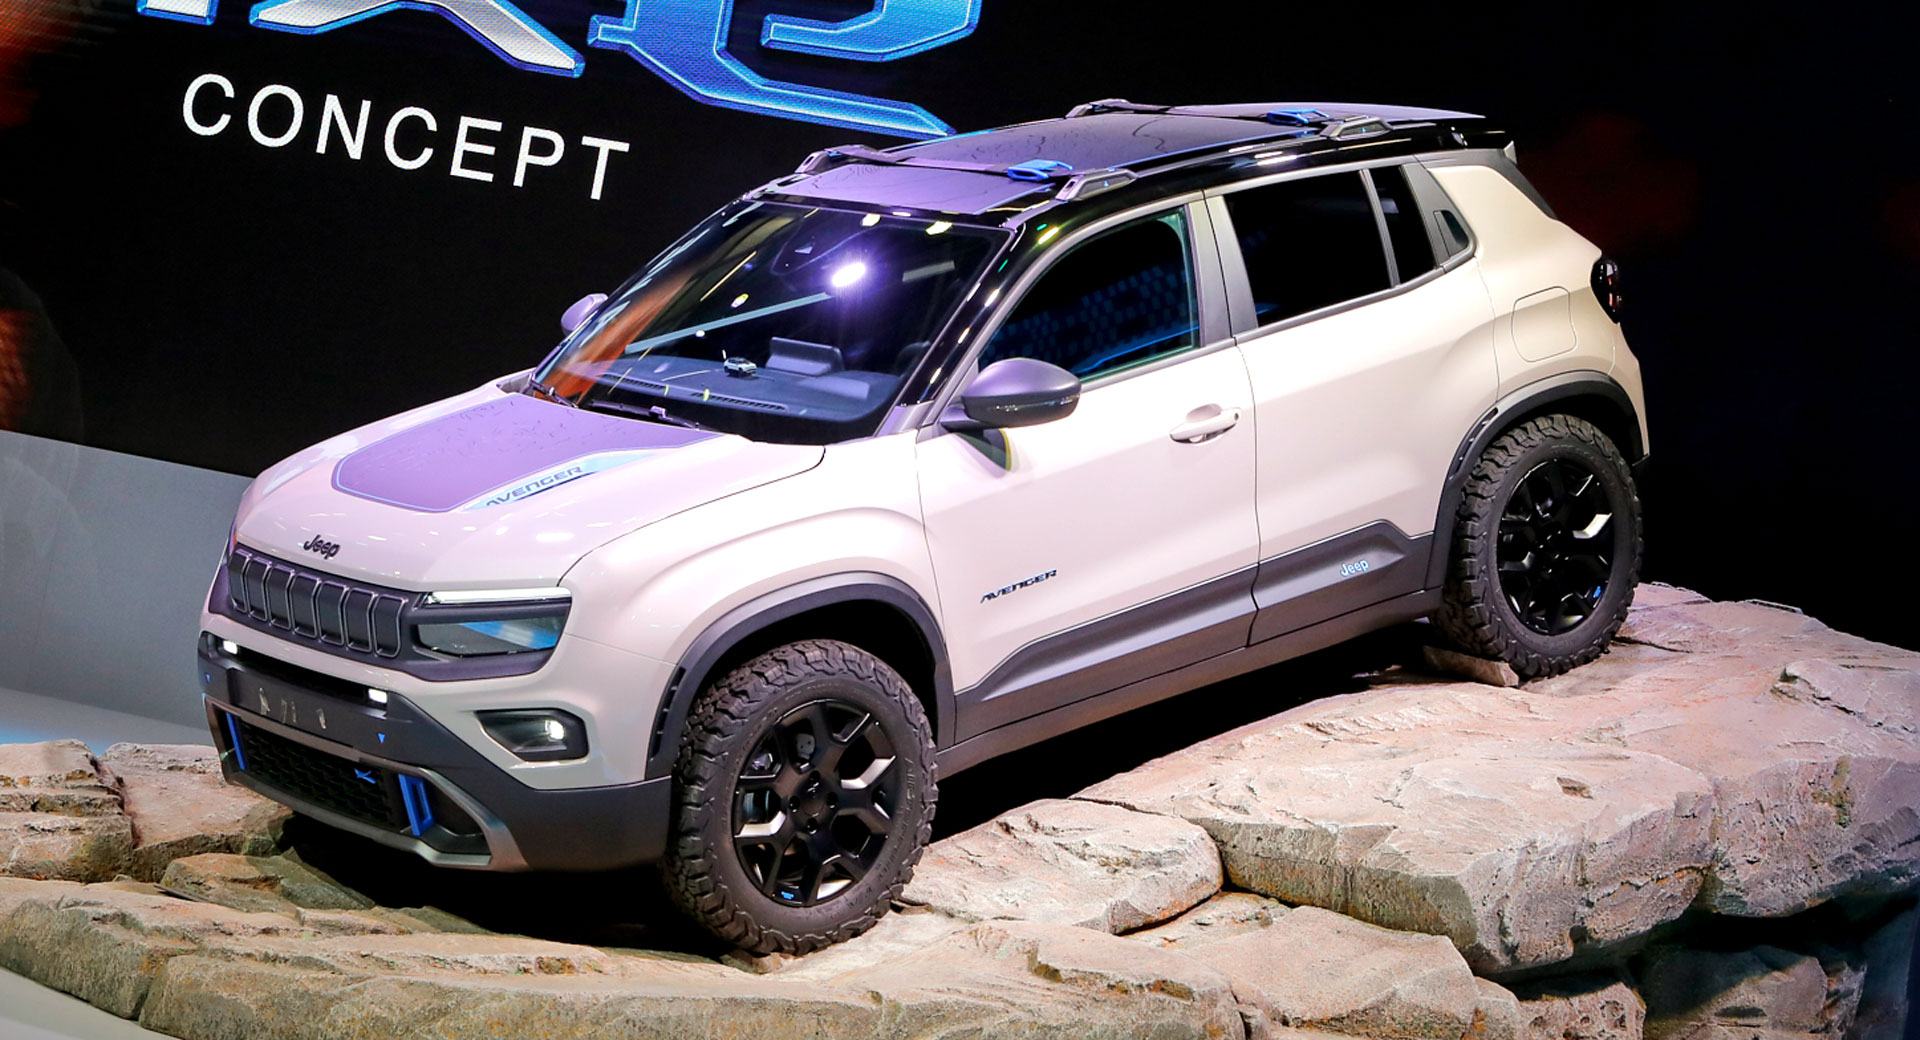 Jeep Avenger 4×4 Is A Chunkier Tough Concept Based On The New Baby